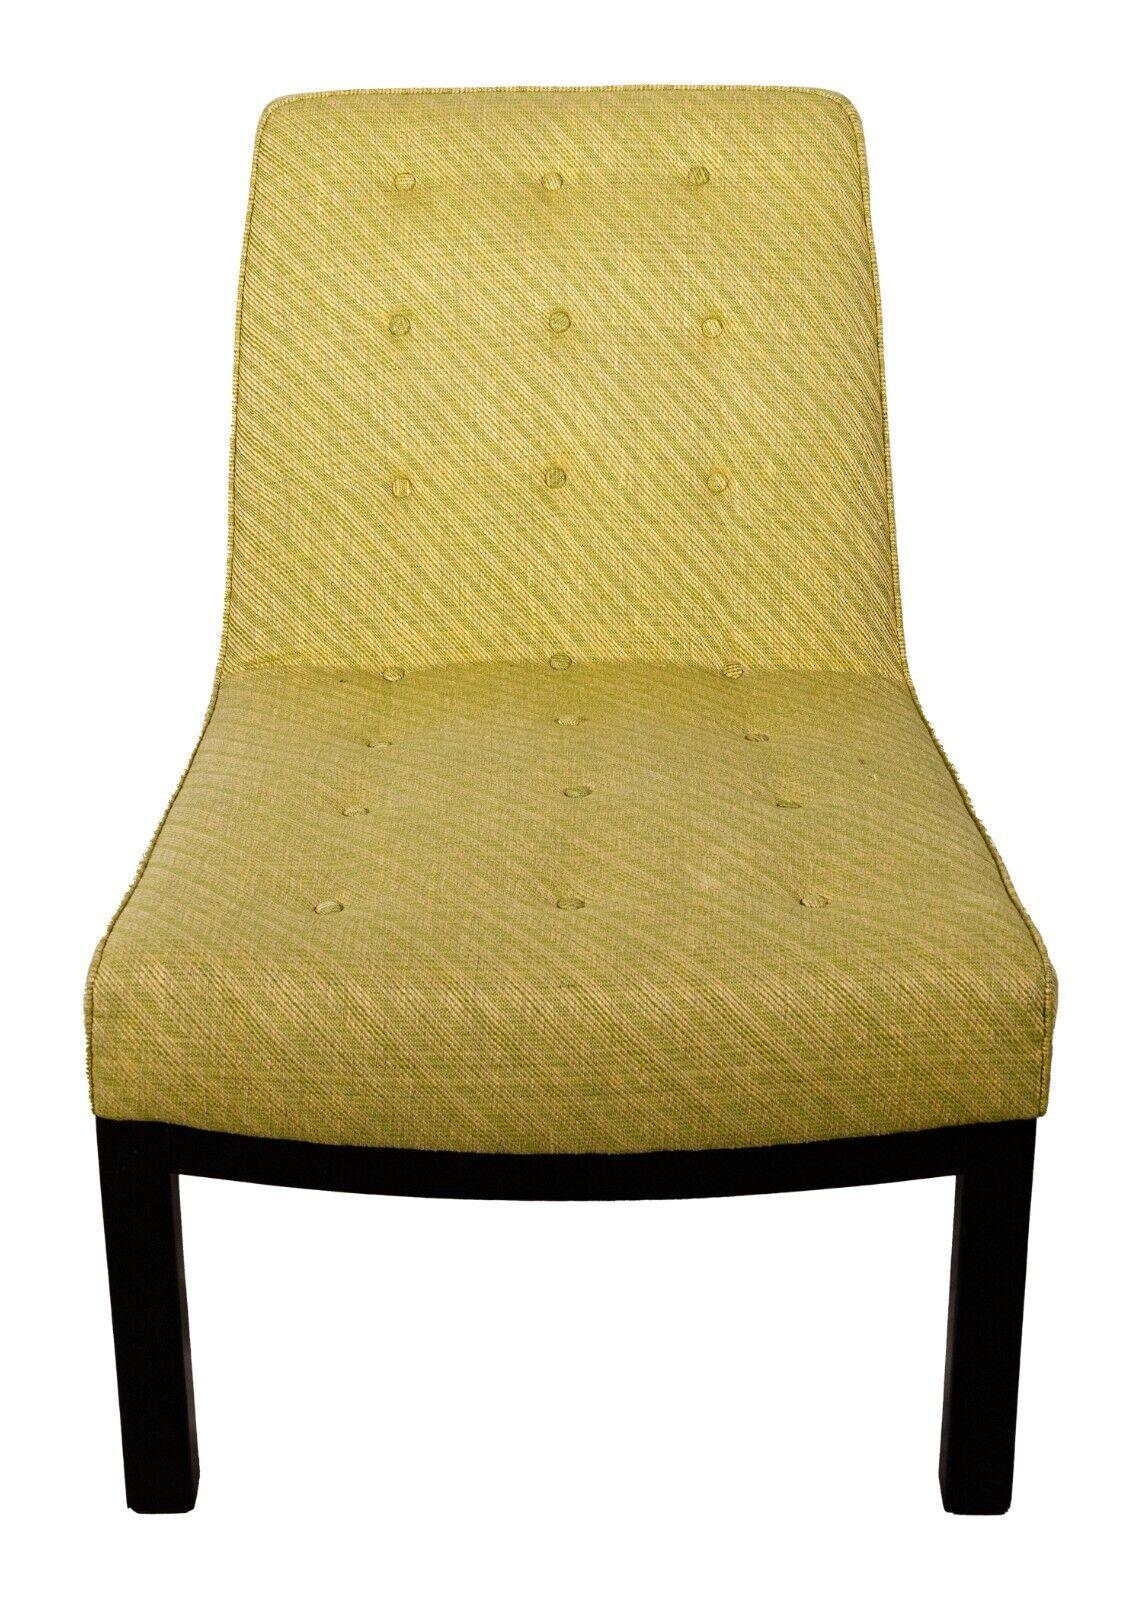 A Dunbar slipper chair. This is a very delightful chair from furniture brand Dunbar. This slipper chair features a green upholstery construction with rows of three buttons going up and down the seat and back of the chair. This piece features a